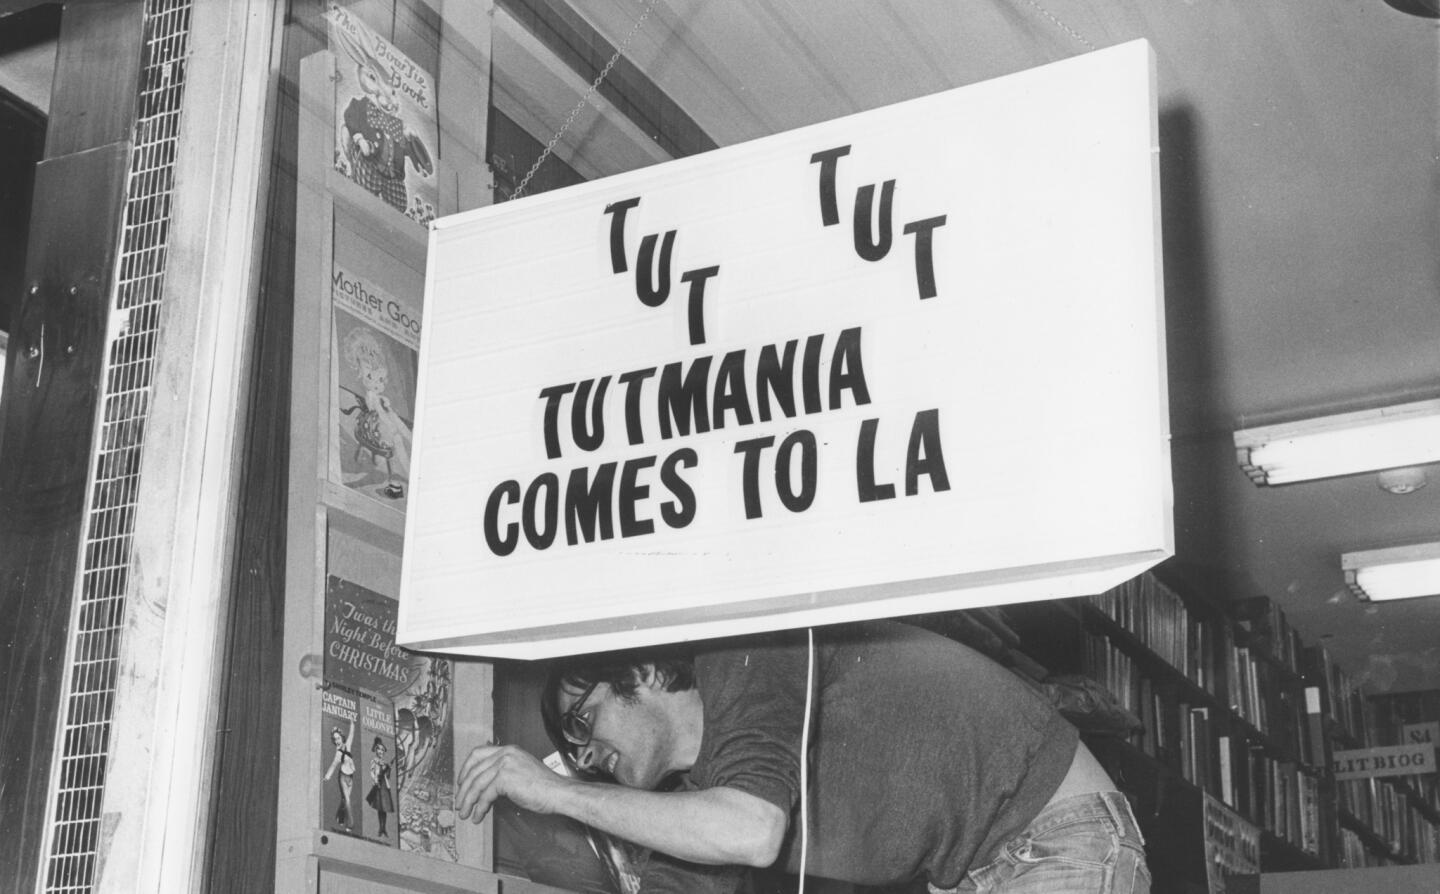 Cory Randall of Hollywood Book City puts finishing touches on his Tut windows sign on Jan. 29, 1978.